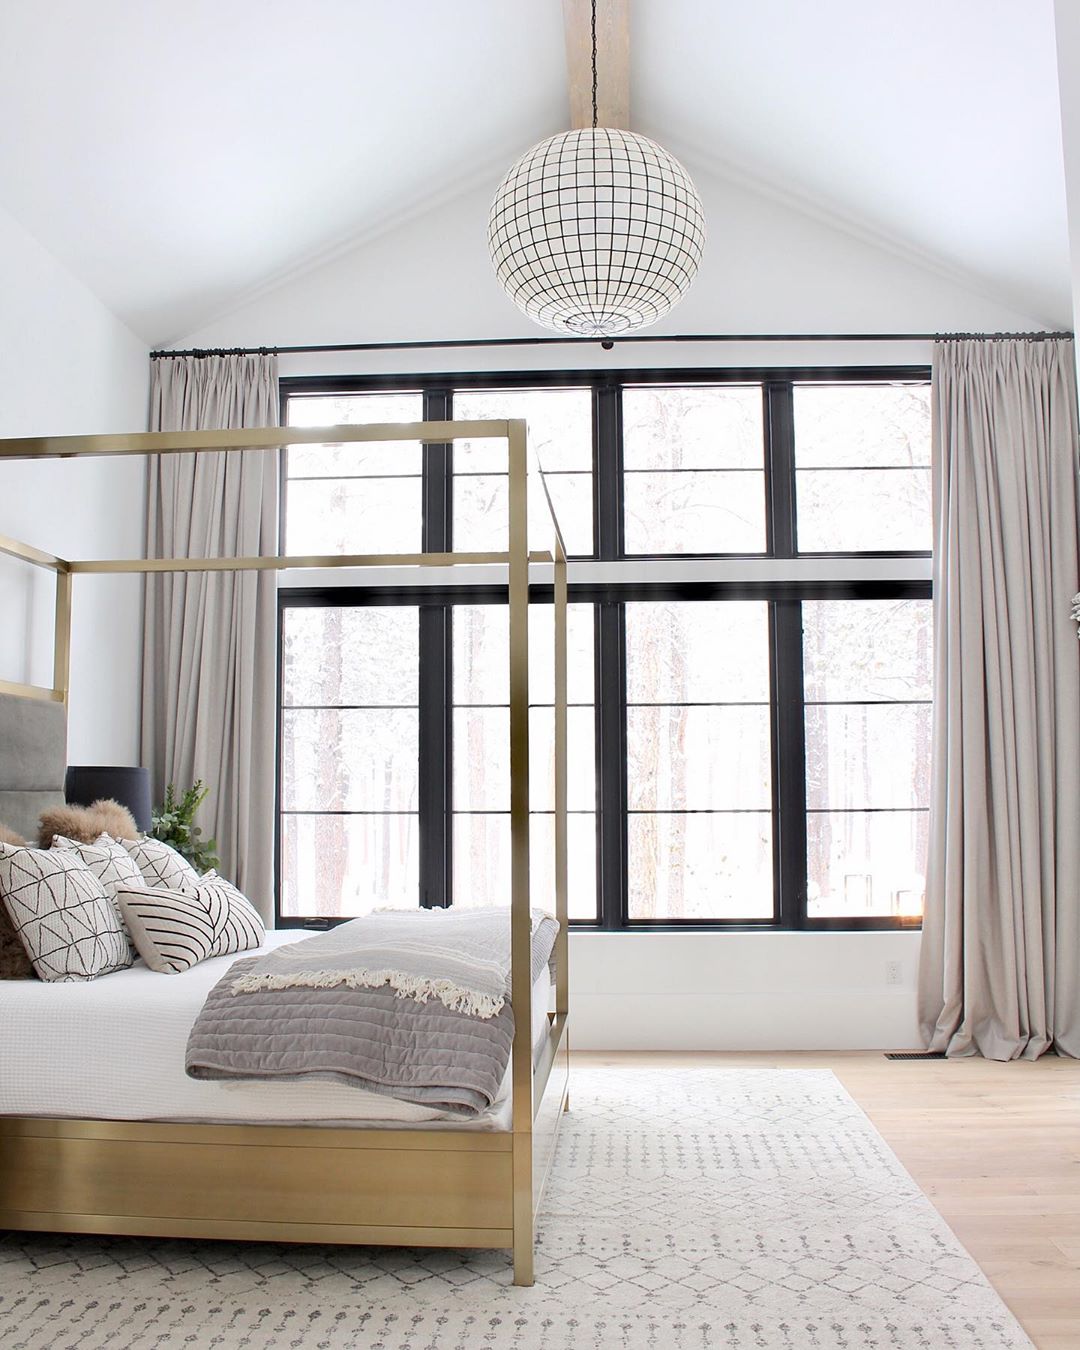 White bedroom with tan window curtains and gold four-post bed. Photo by Instagram use @thehouseofsilverlining